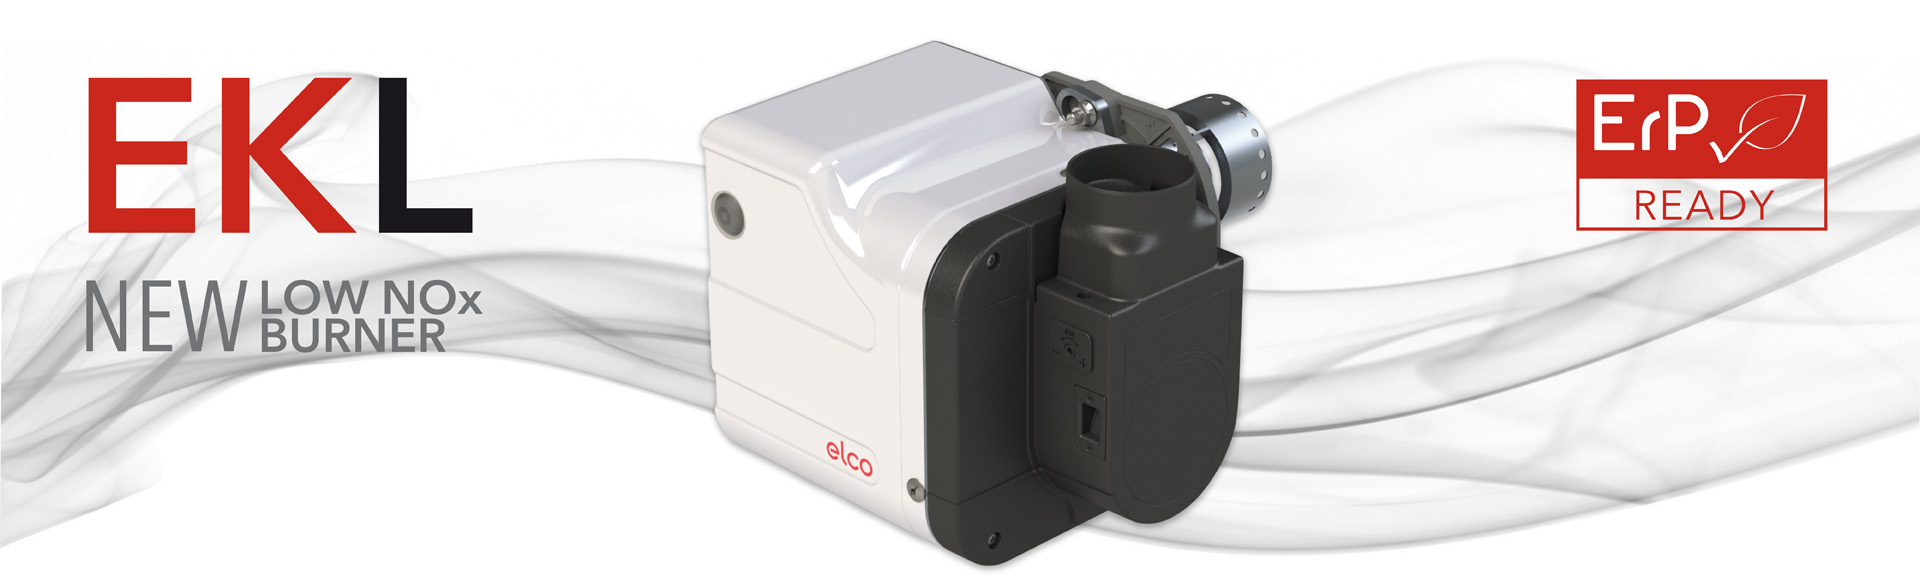 Elco Burners Fit for the future: ELCO enters UK & Ireland OEM market with new low NOx model